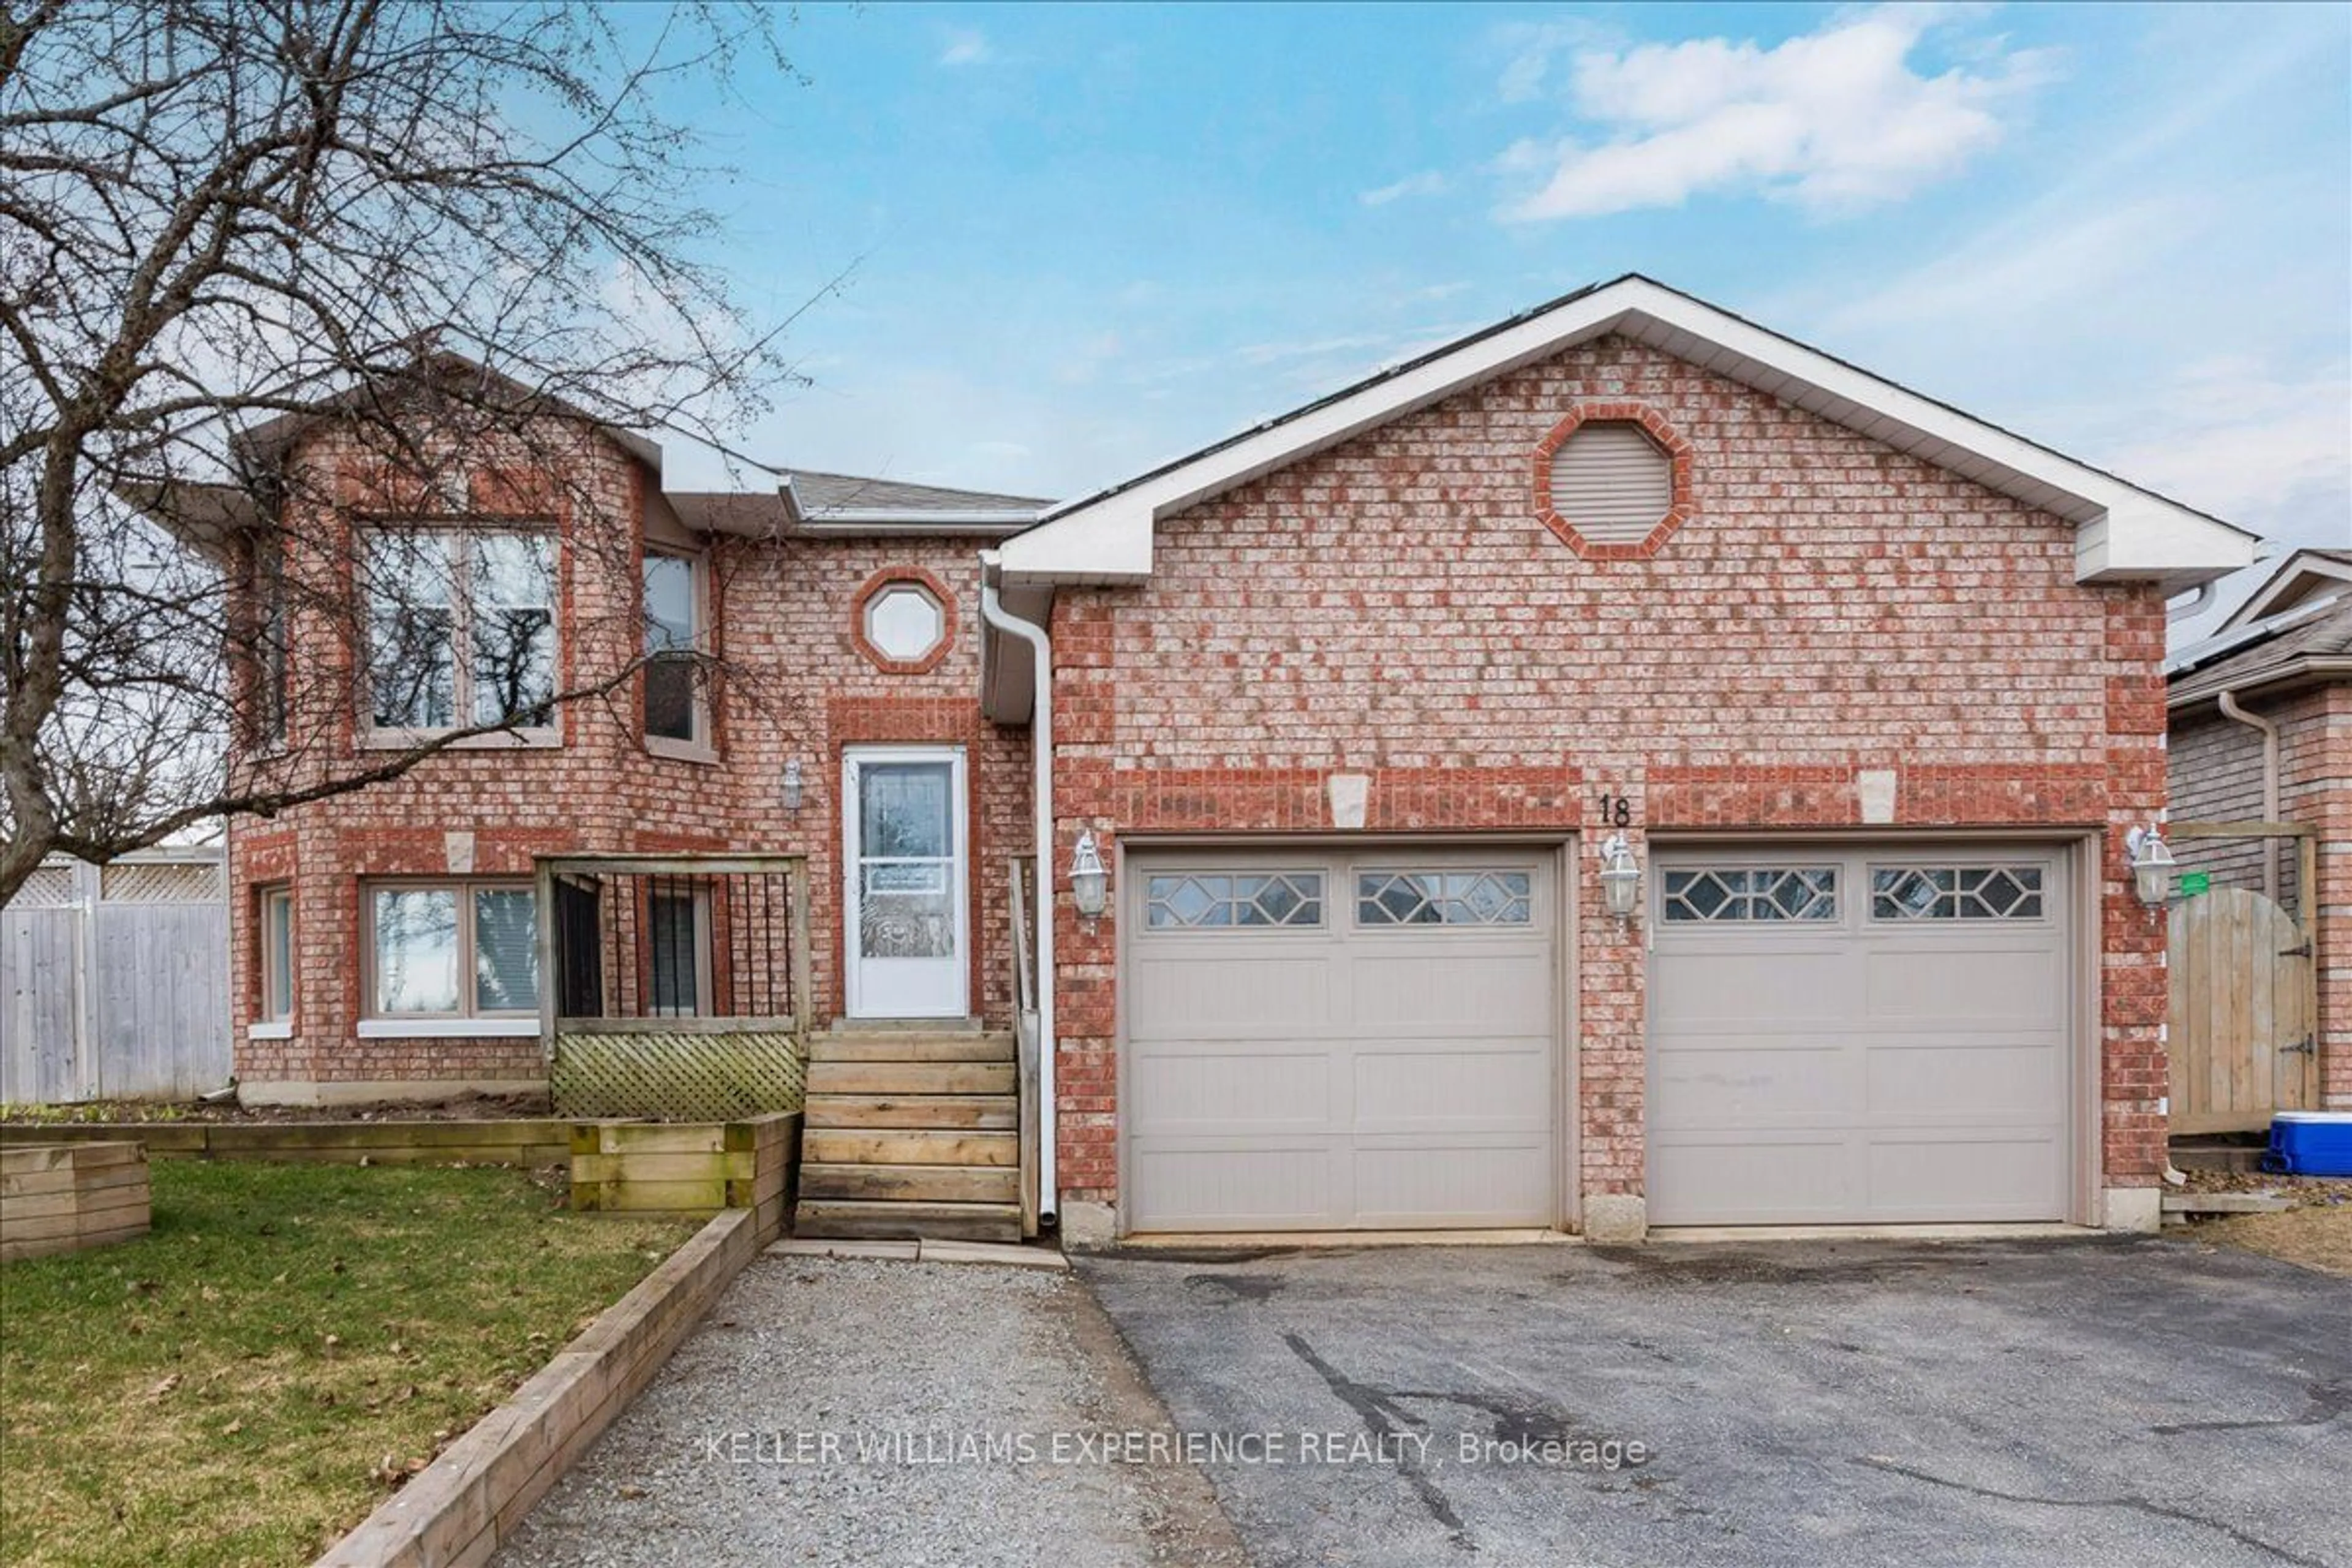 Home with brick exterior material for 18 Nugent Crt, Barrie Ontario L4N 7A9